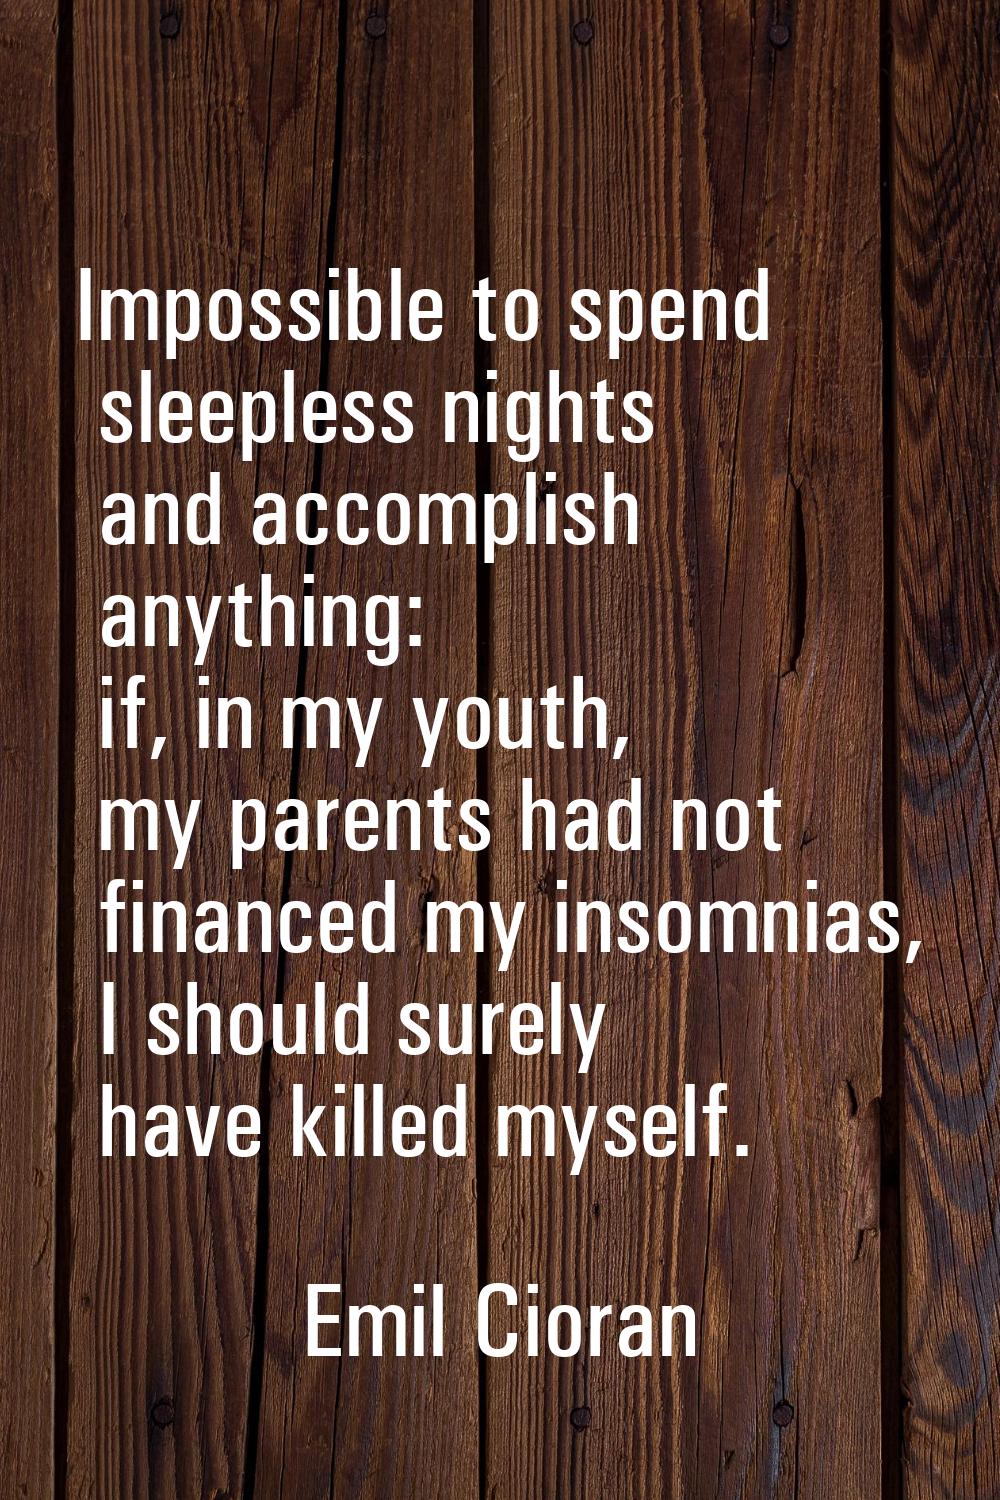 Impossible to spend sleepless nights and accomplish anything: if, in my youth, my parents had not f